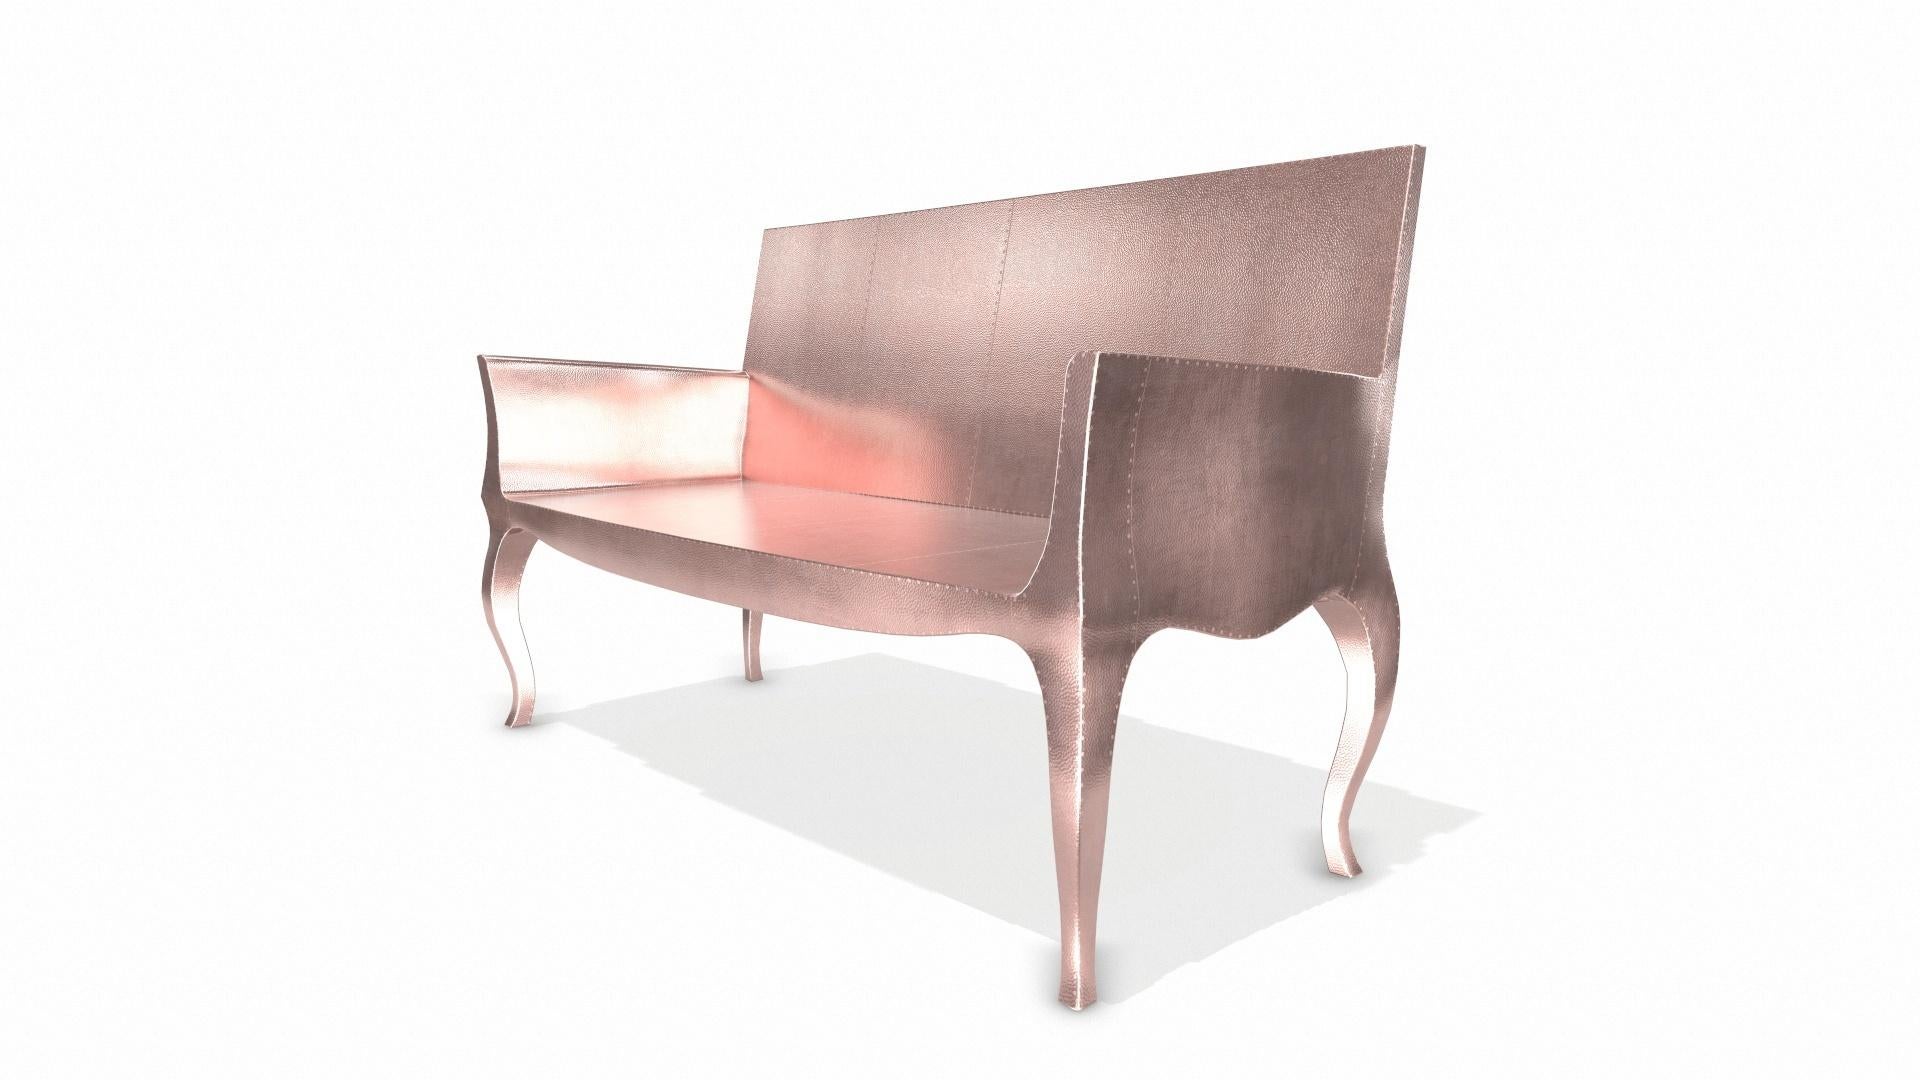 Cast Louise Settee Art Deco Daybeds in Mid. Hammered Copper by Paul Mathieu For Sale